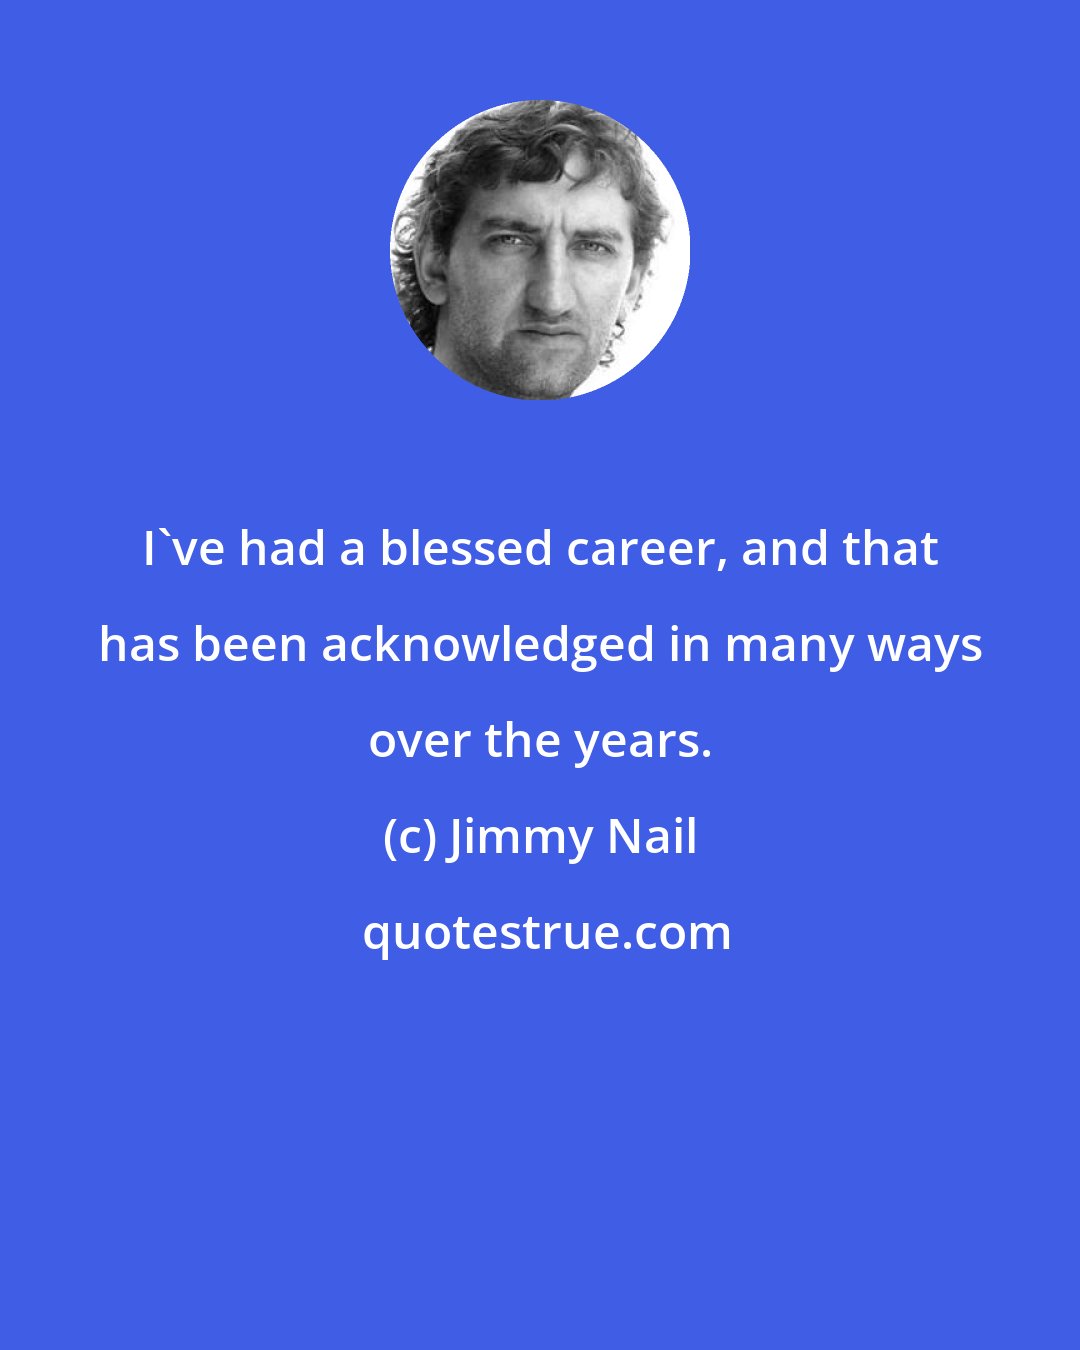 Jimmy Nail: I've had a blessed career, and that has been acknowledged in many ways over the years.